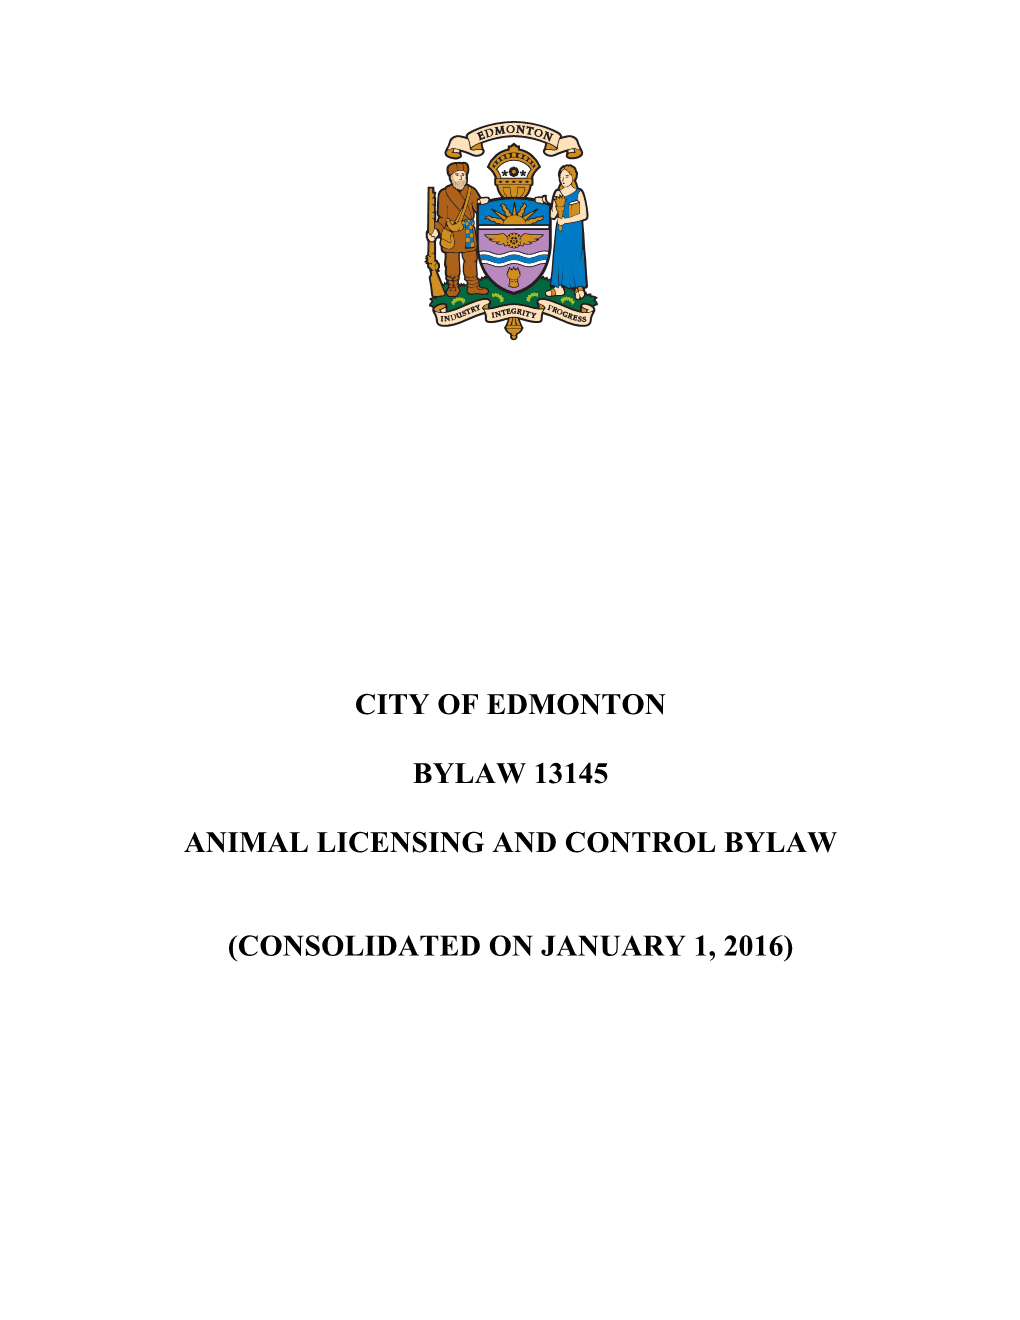 City of Edmonton Bylaw 13145 Animal Licensing and Control Bylaw